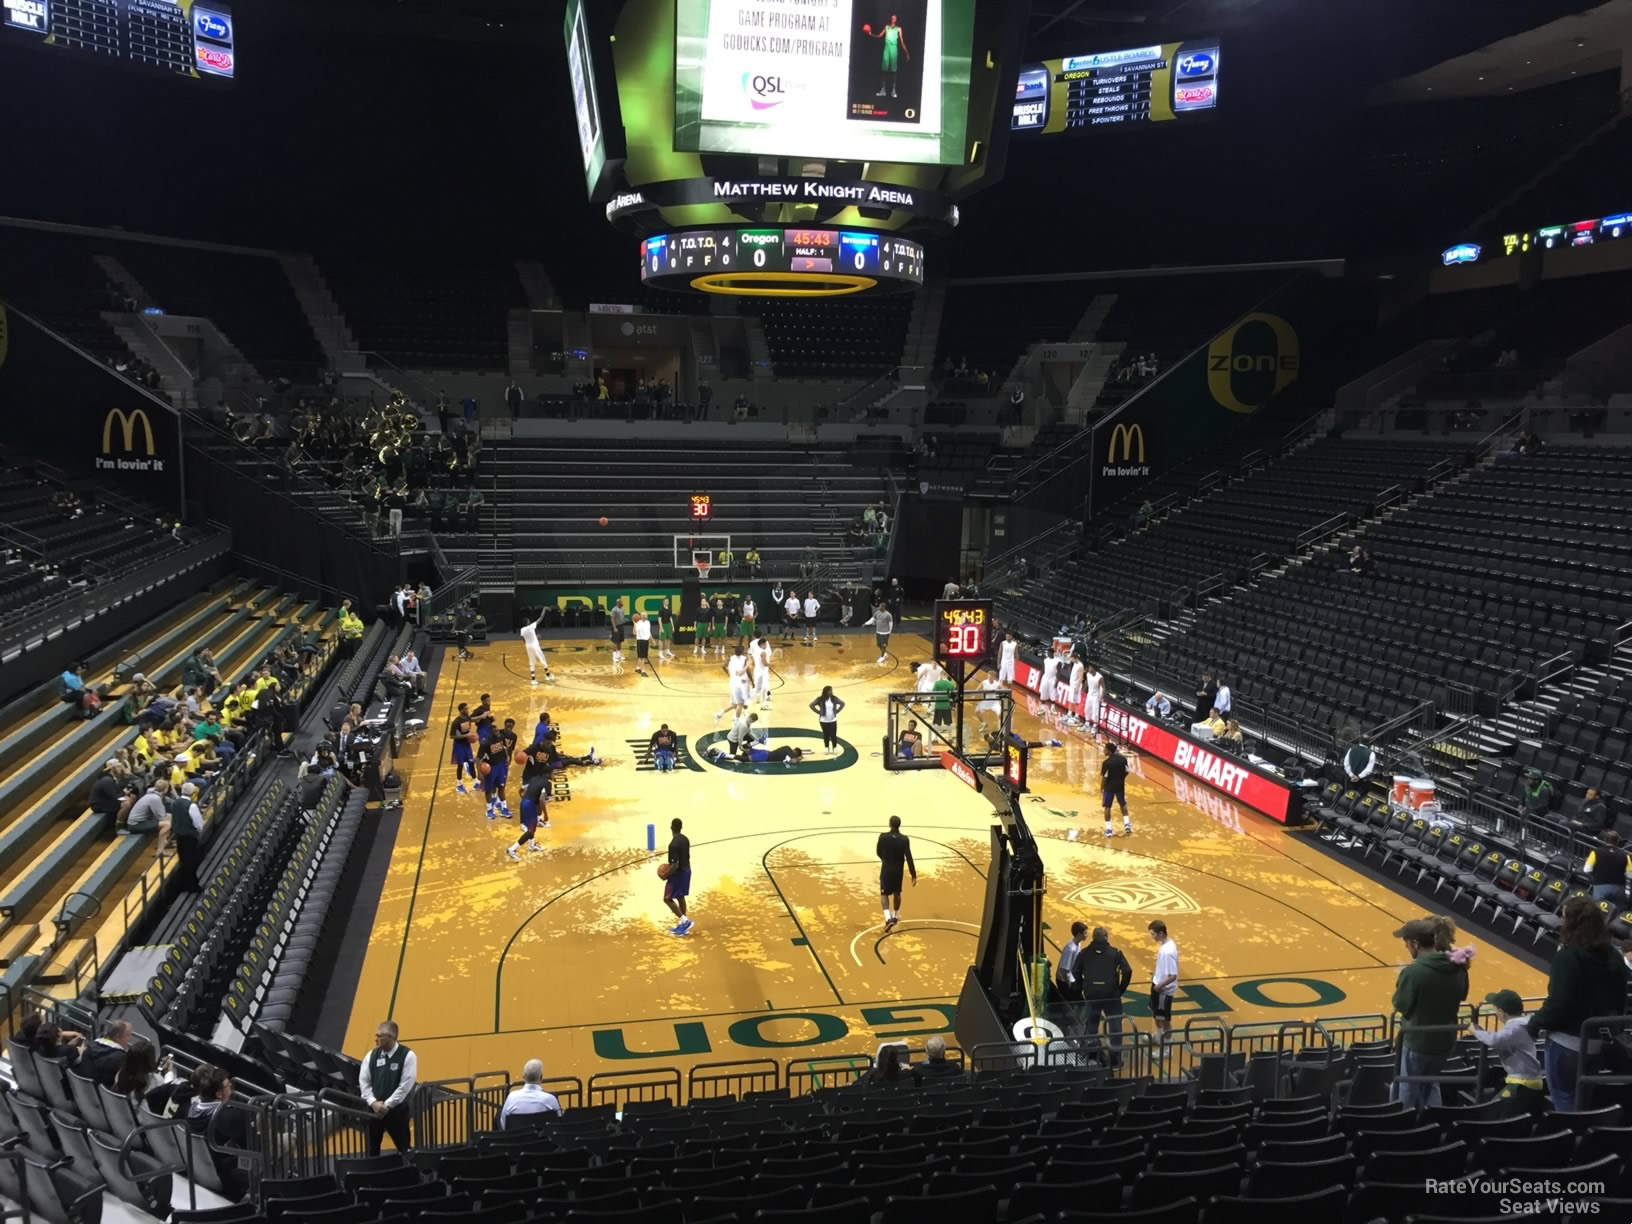 section 108, row k seat view  - matthew knight arena